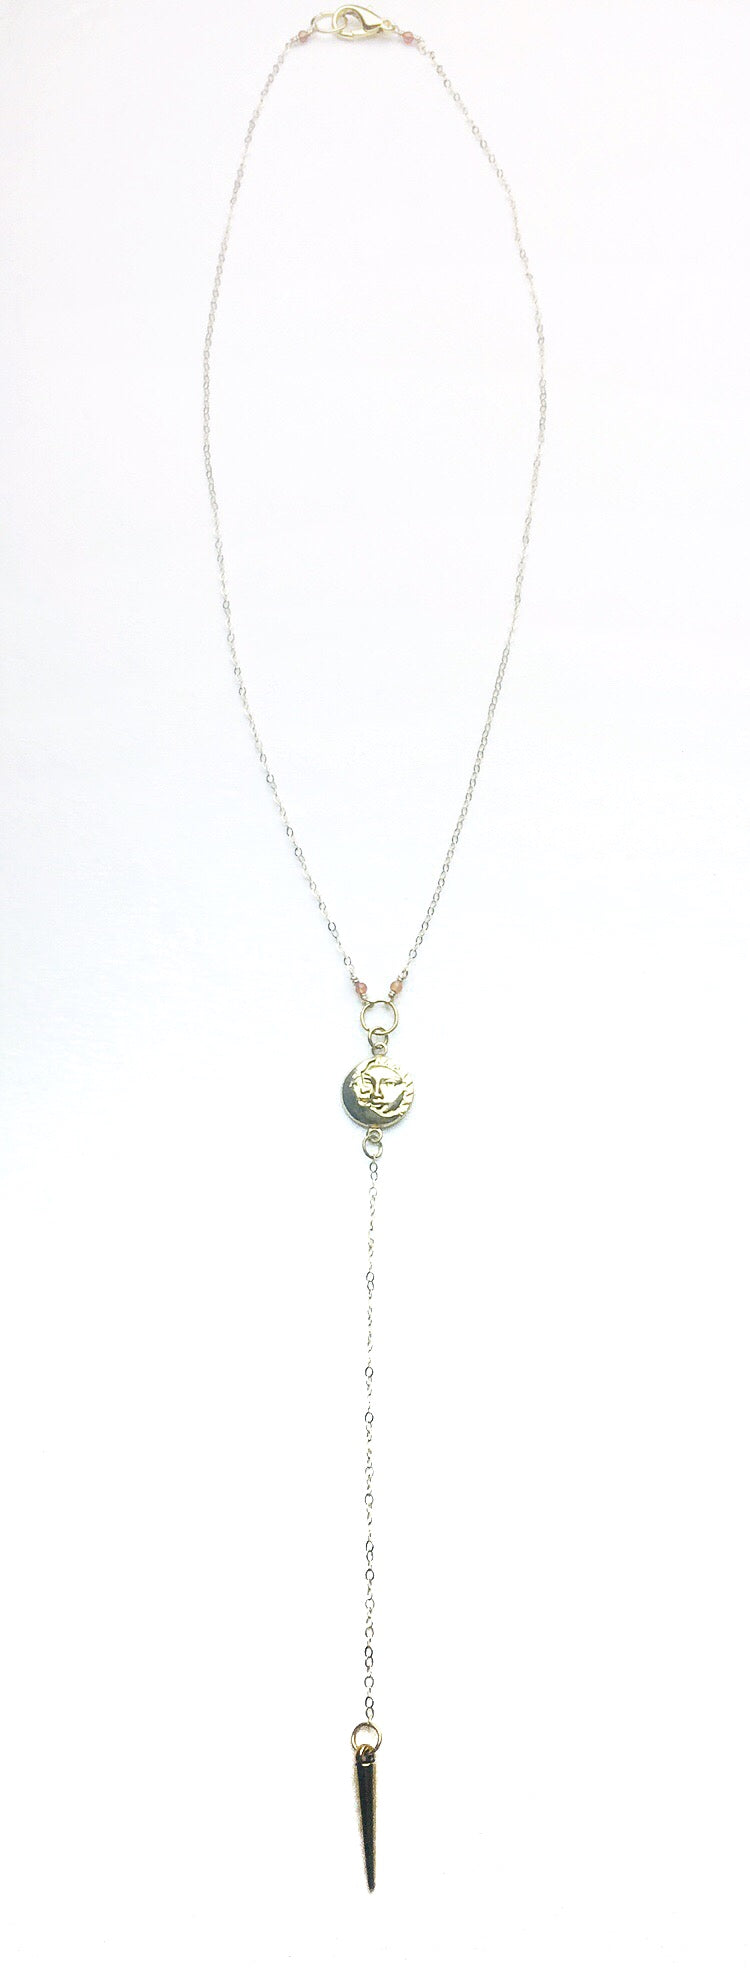 Celestial Lovers Necklace - Luni